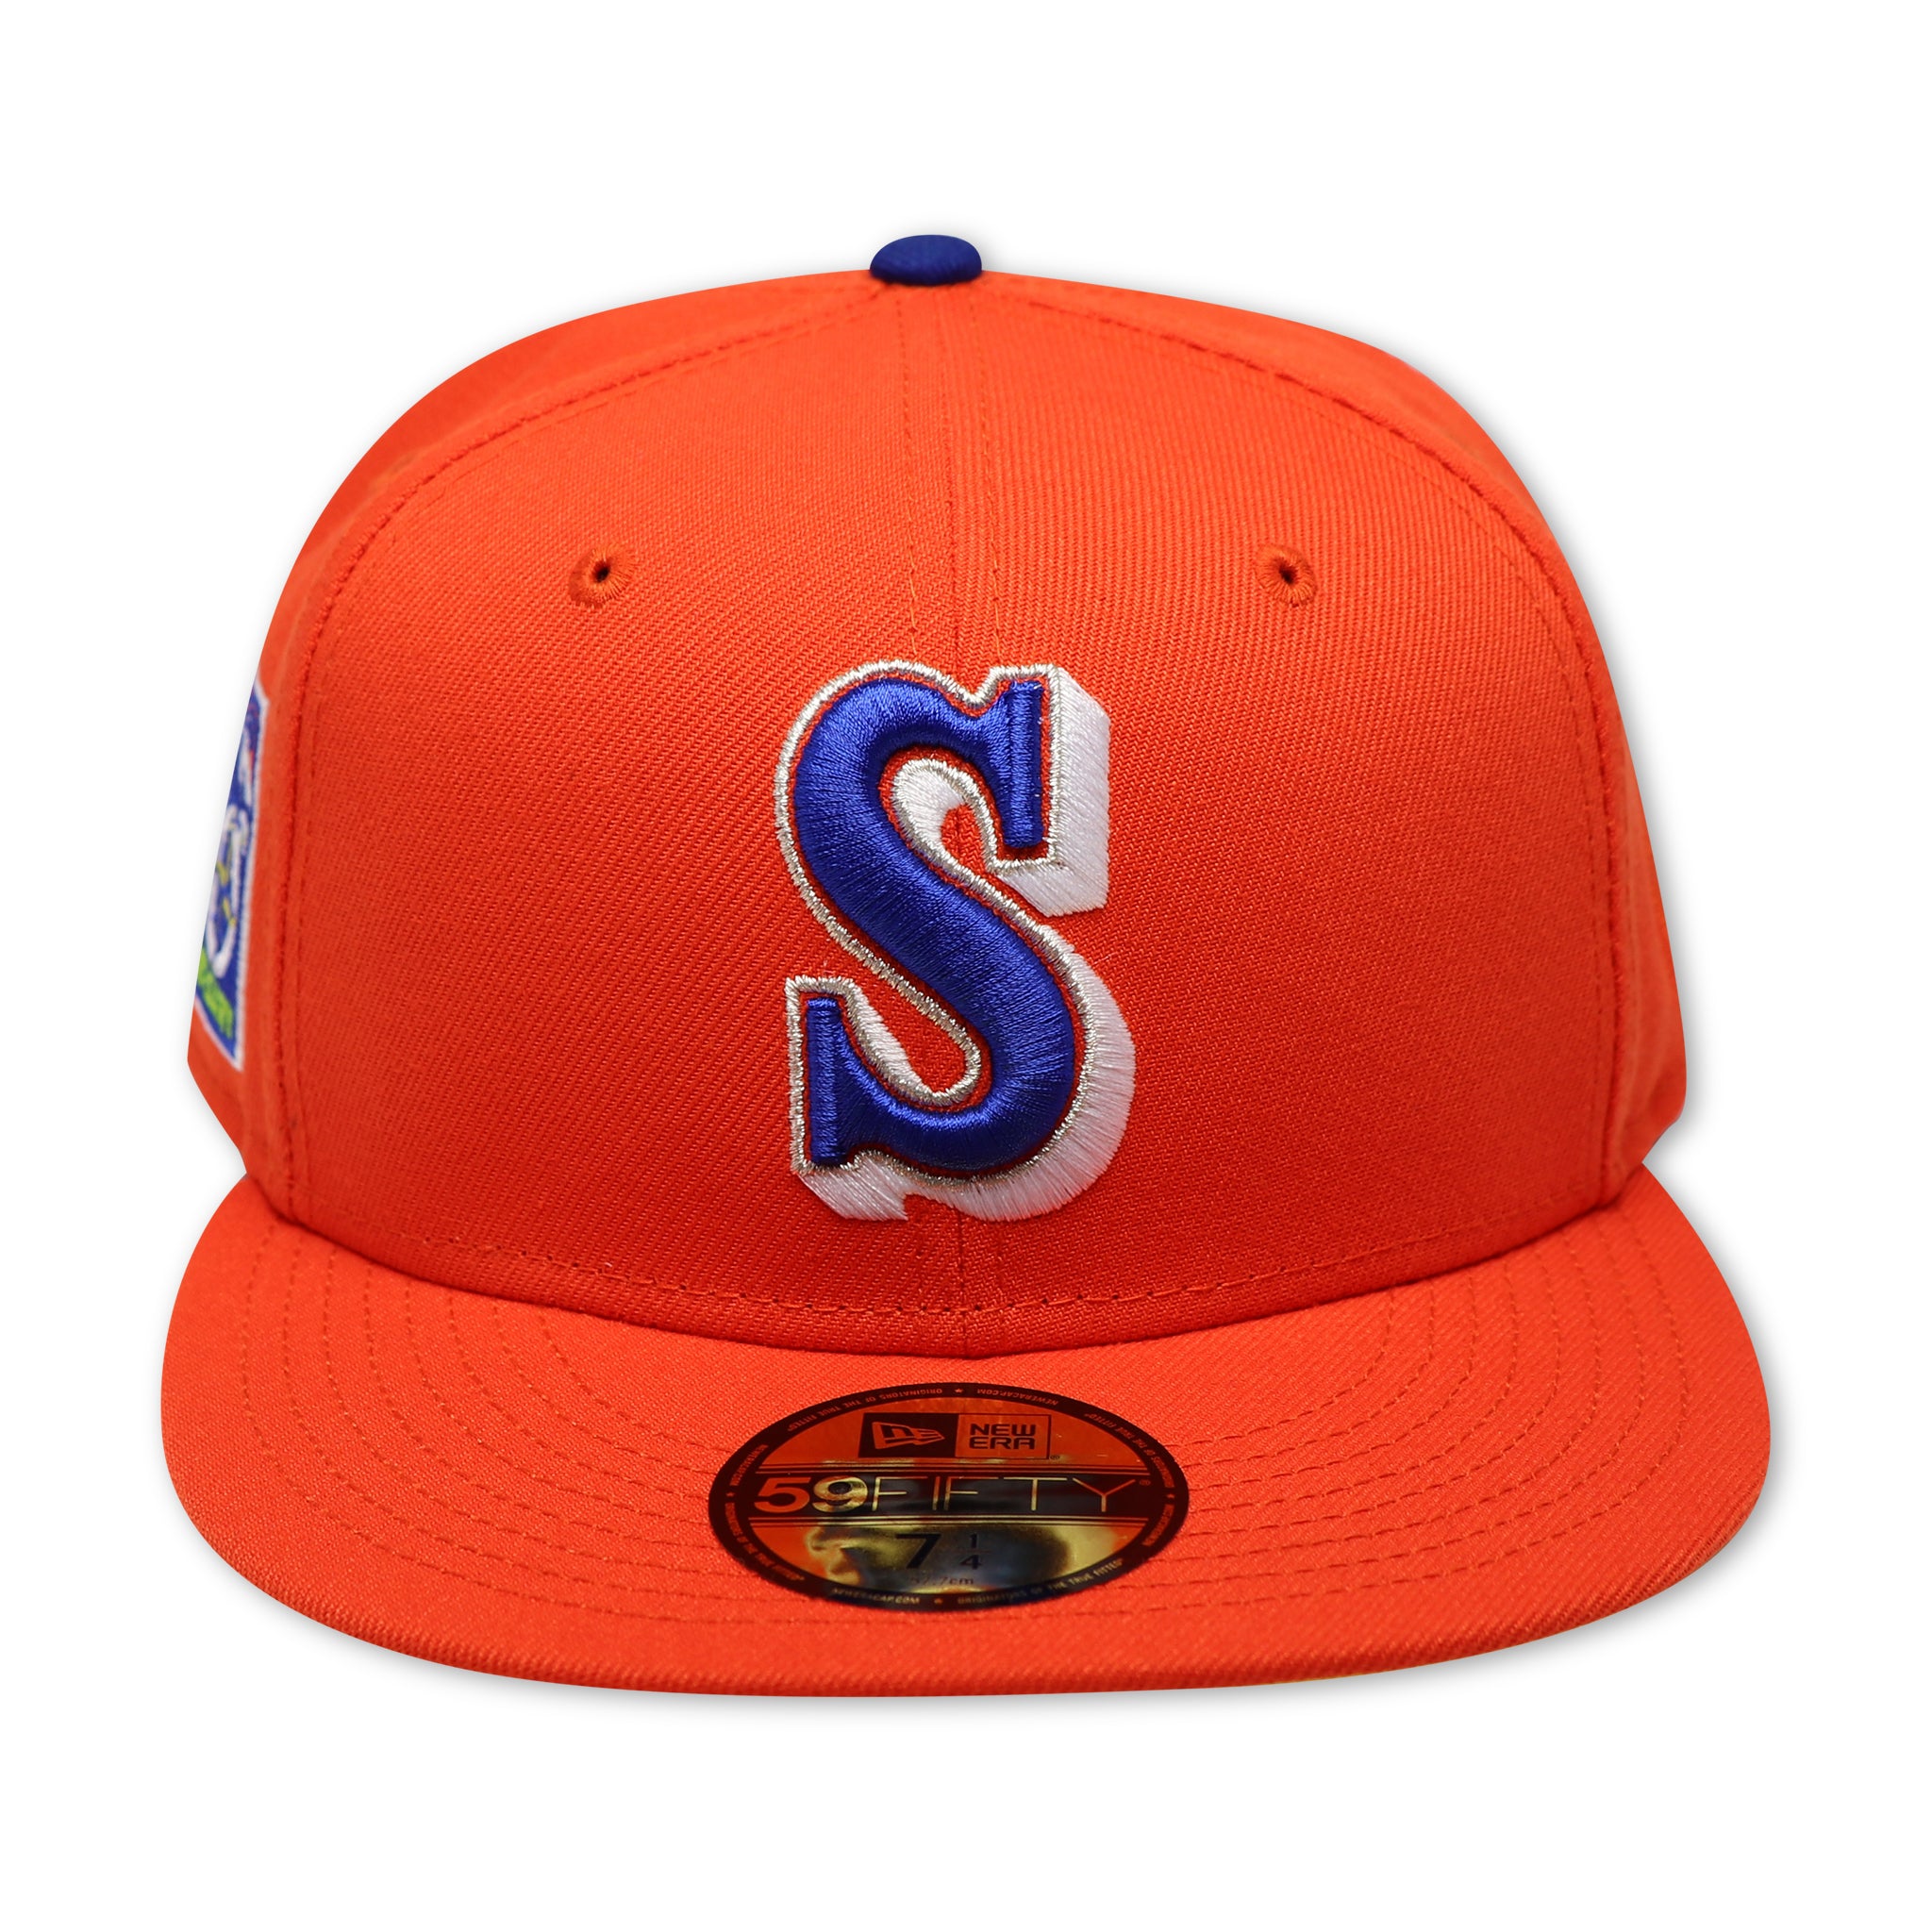 SEATTLE MARINERS "SUNKIST" (40TH ANNIVERSARY) NEW ERA 59FIFTY FITTED (YELLOW UNDER VISOR) (S)